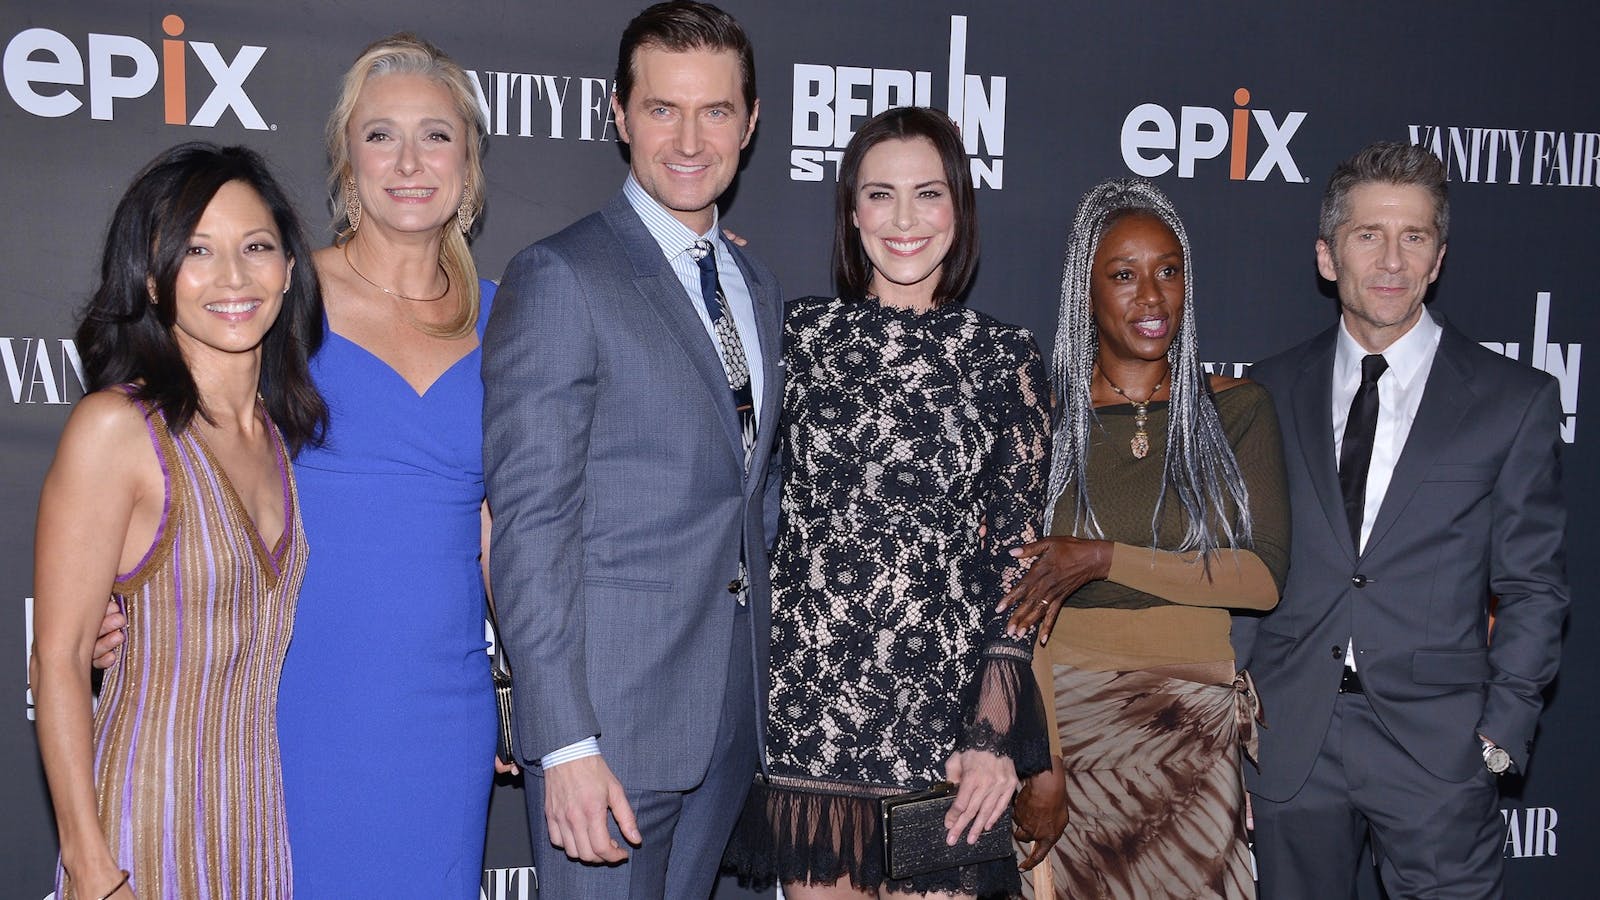 Cast of Epix's "Berlin Station" drama at a premiere in 2016. Photo by AP